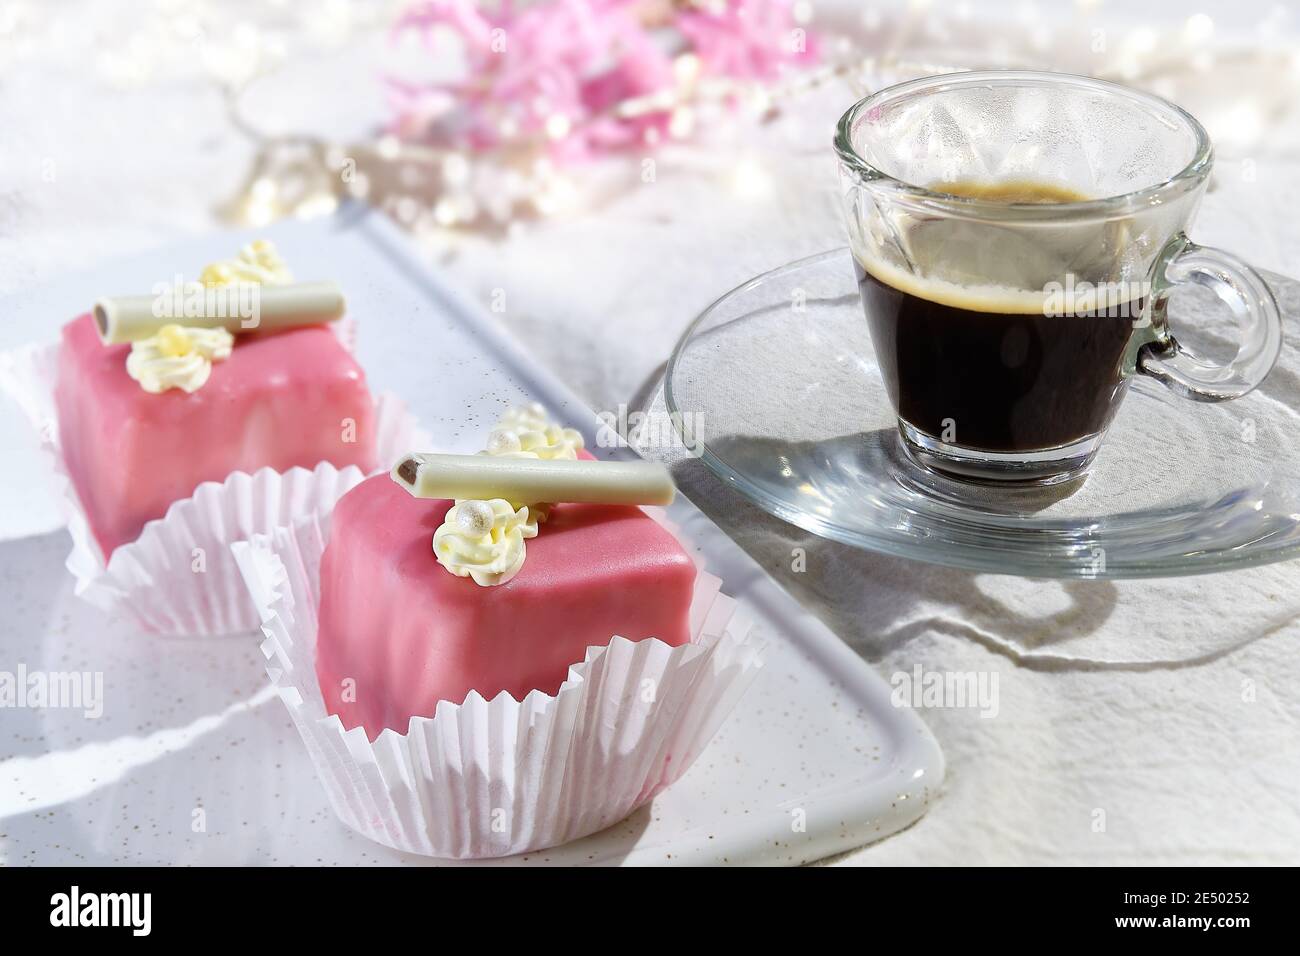 Valentine petit fours with marzipan icing and cream flowers. Espresso coffee in glass cup. Garland of lights on white textile. Pink hyacinth flower Stock Photo